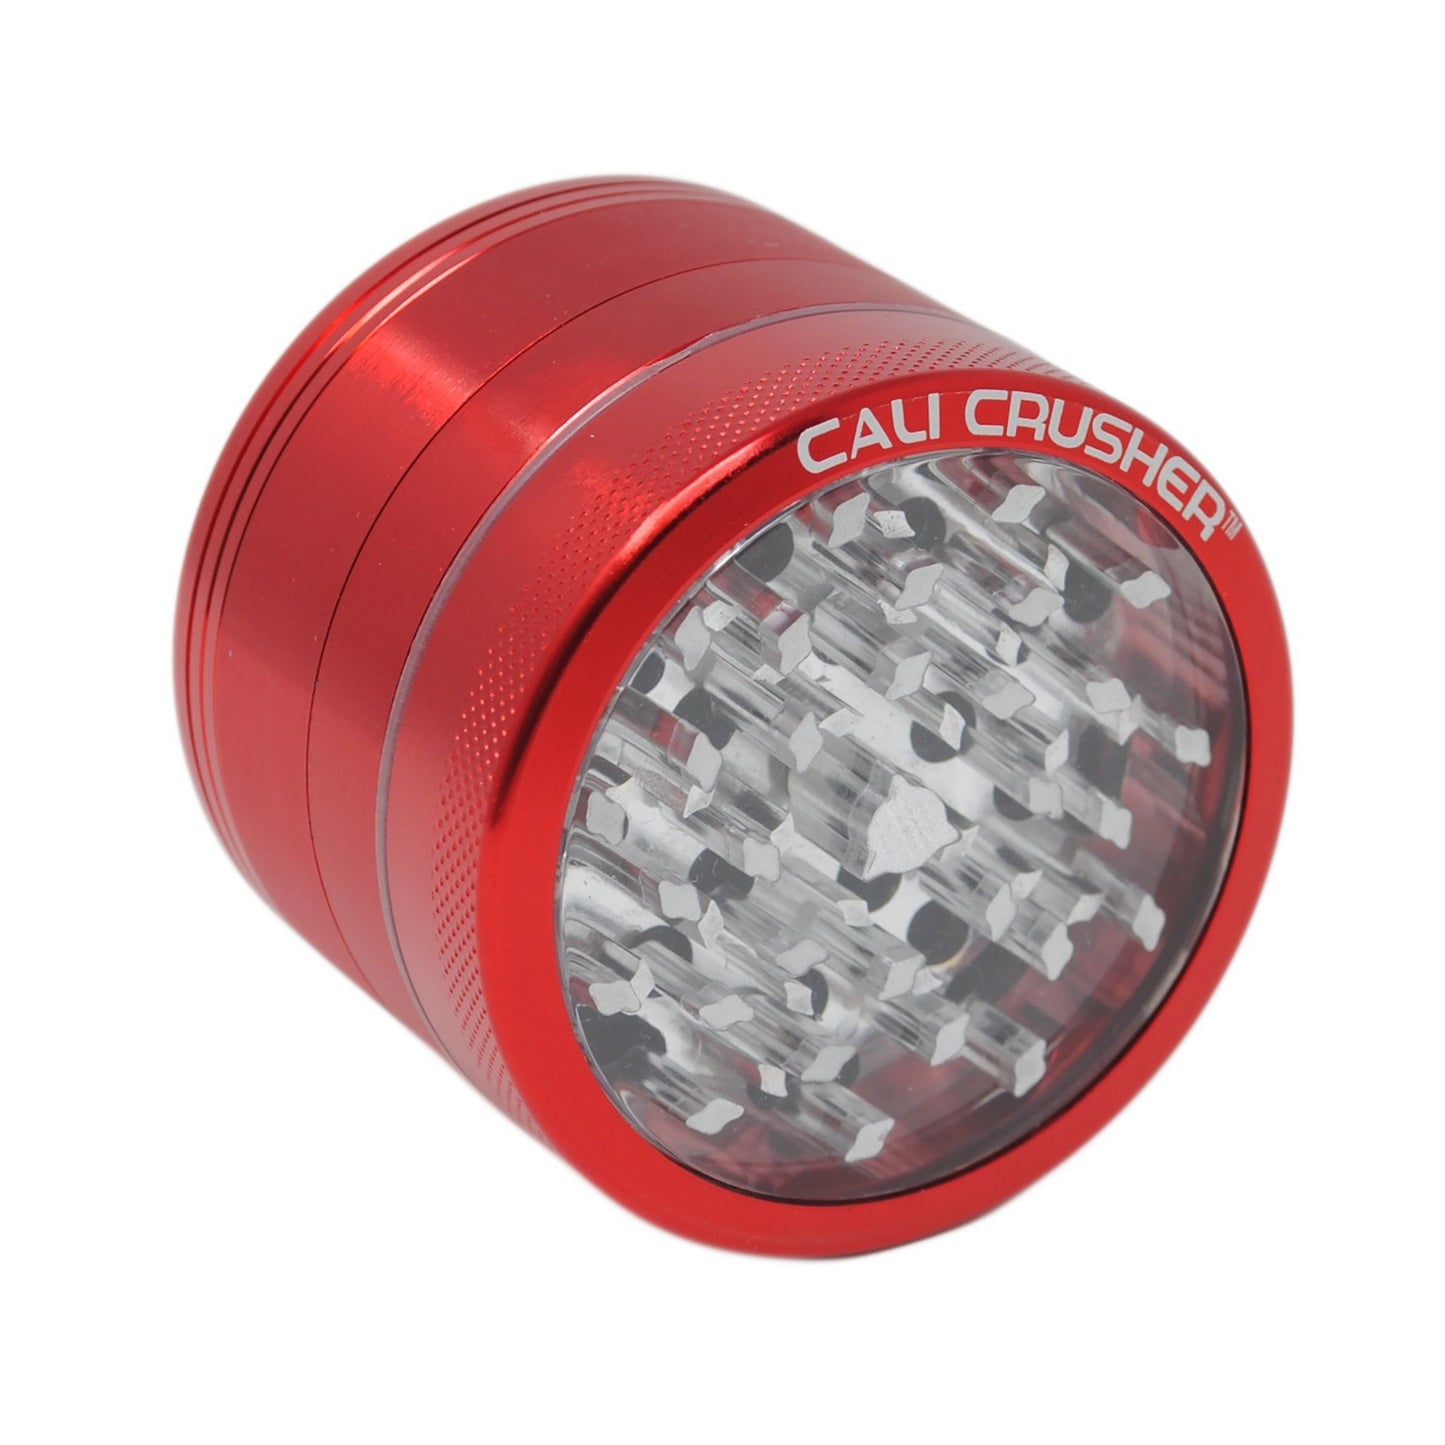 Cali Crusher Clear Top 4 Piece Herb Grinder - 62mm Red